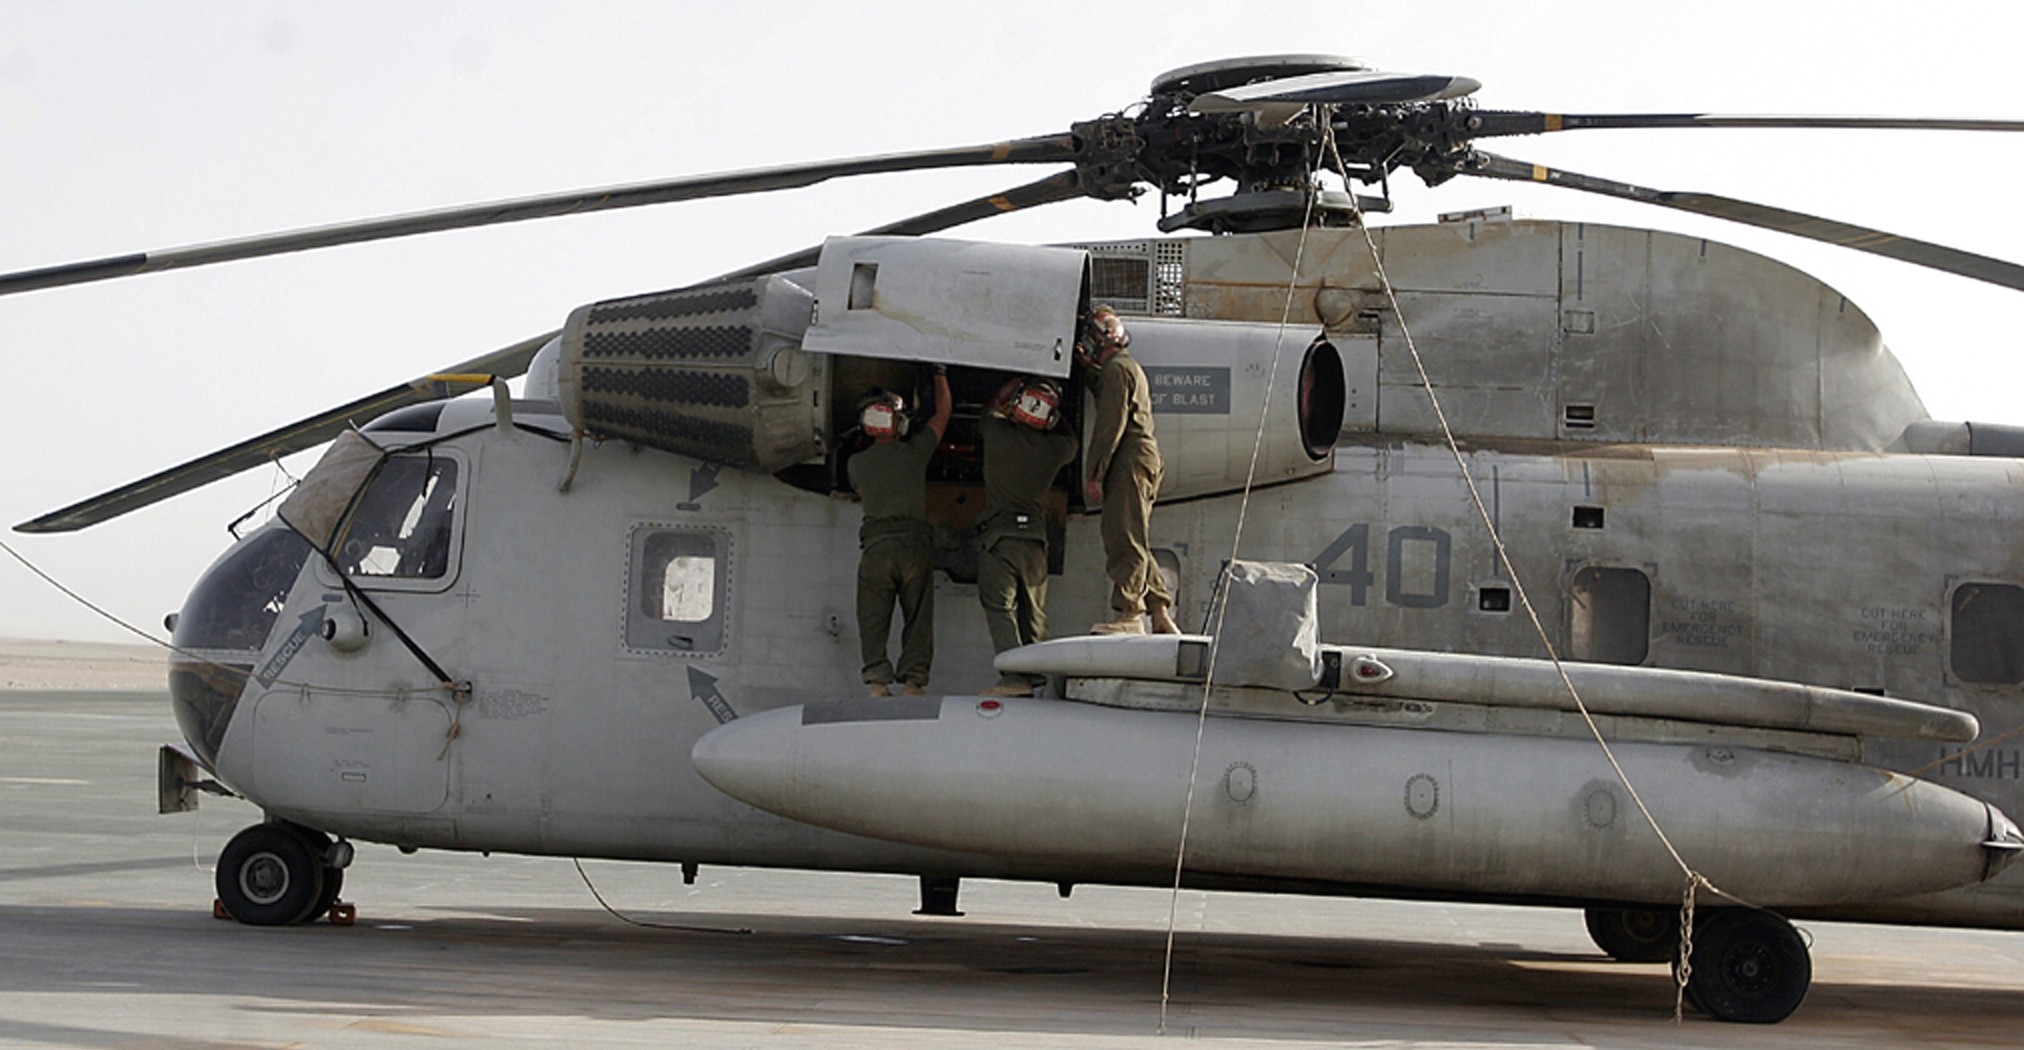 hmh-362 ugly angels marine heavy helicopter squadron usmc sikorsky ch-53d sea stallion 29 camp bastion